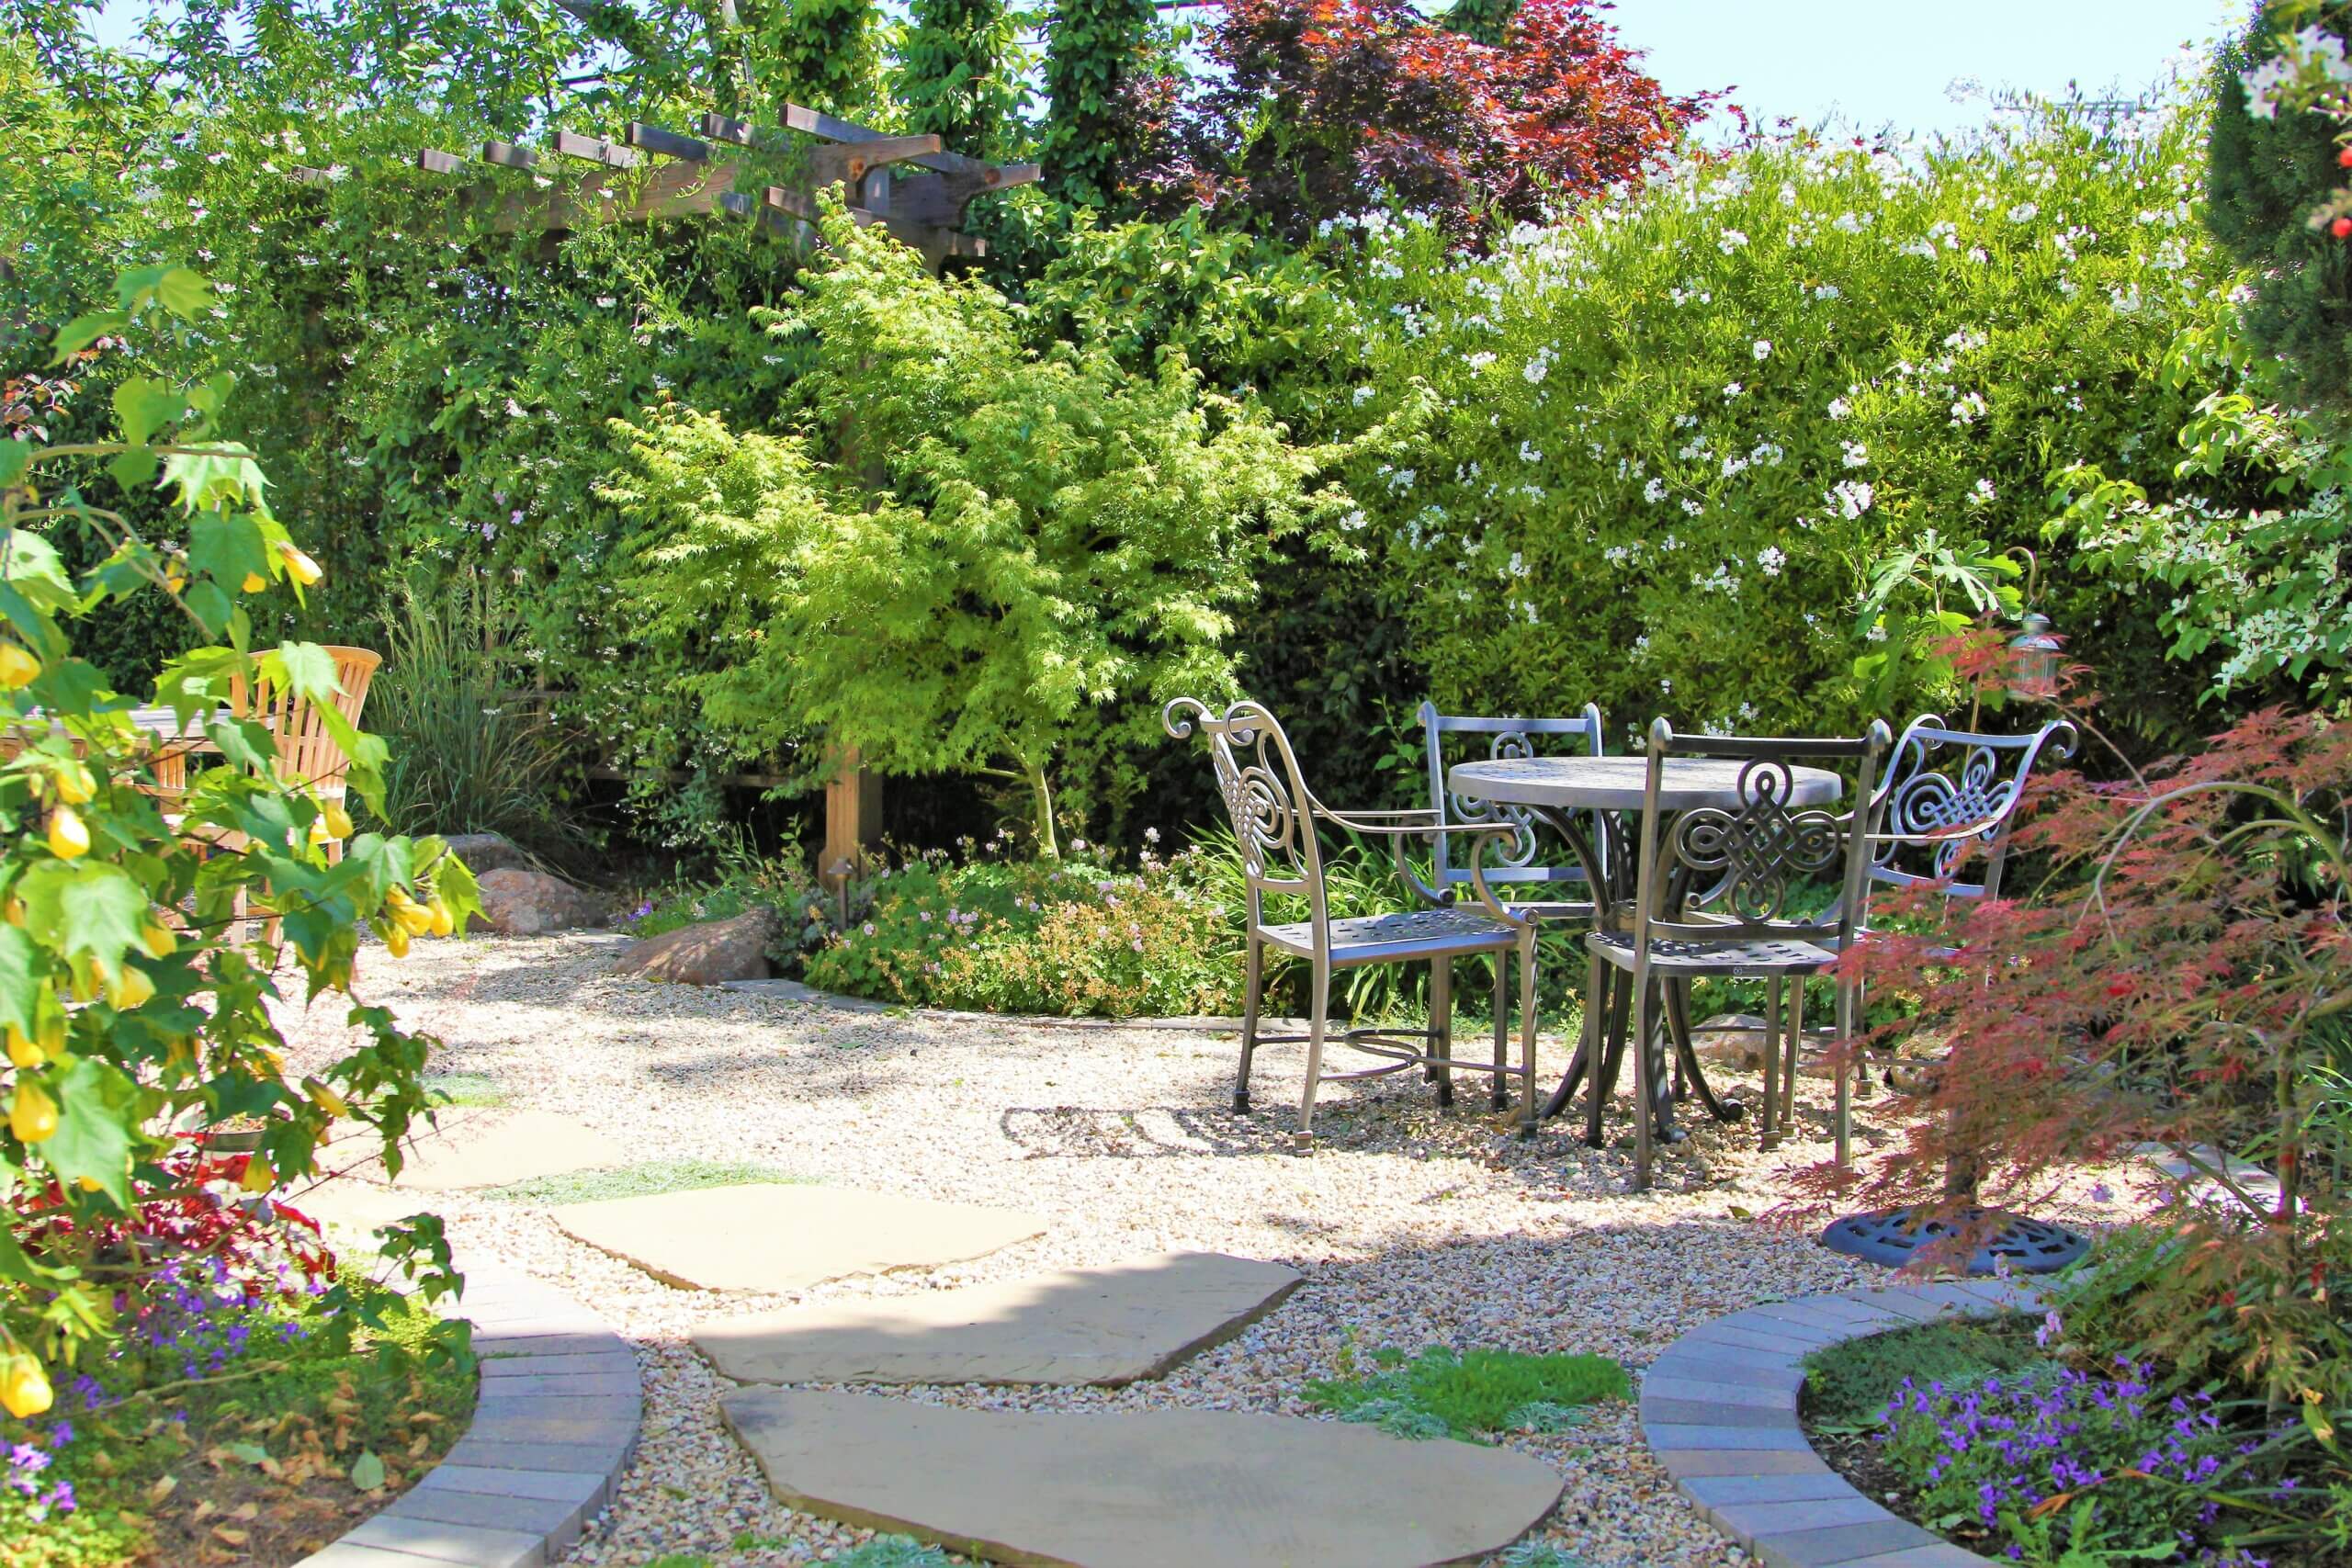 Lush natural California backyard landscape with seating areas on pea gravel and pavers amongst native plant species